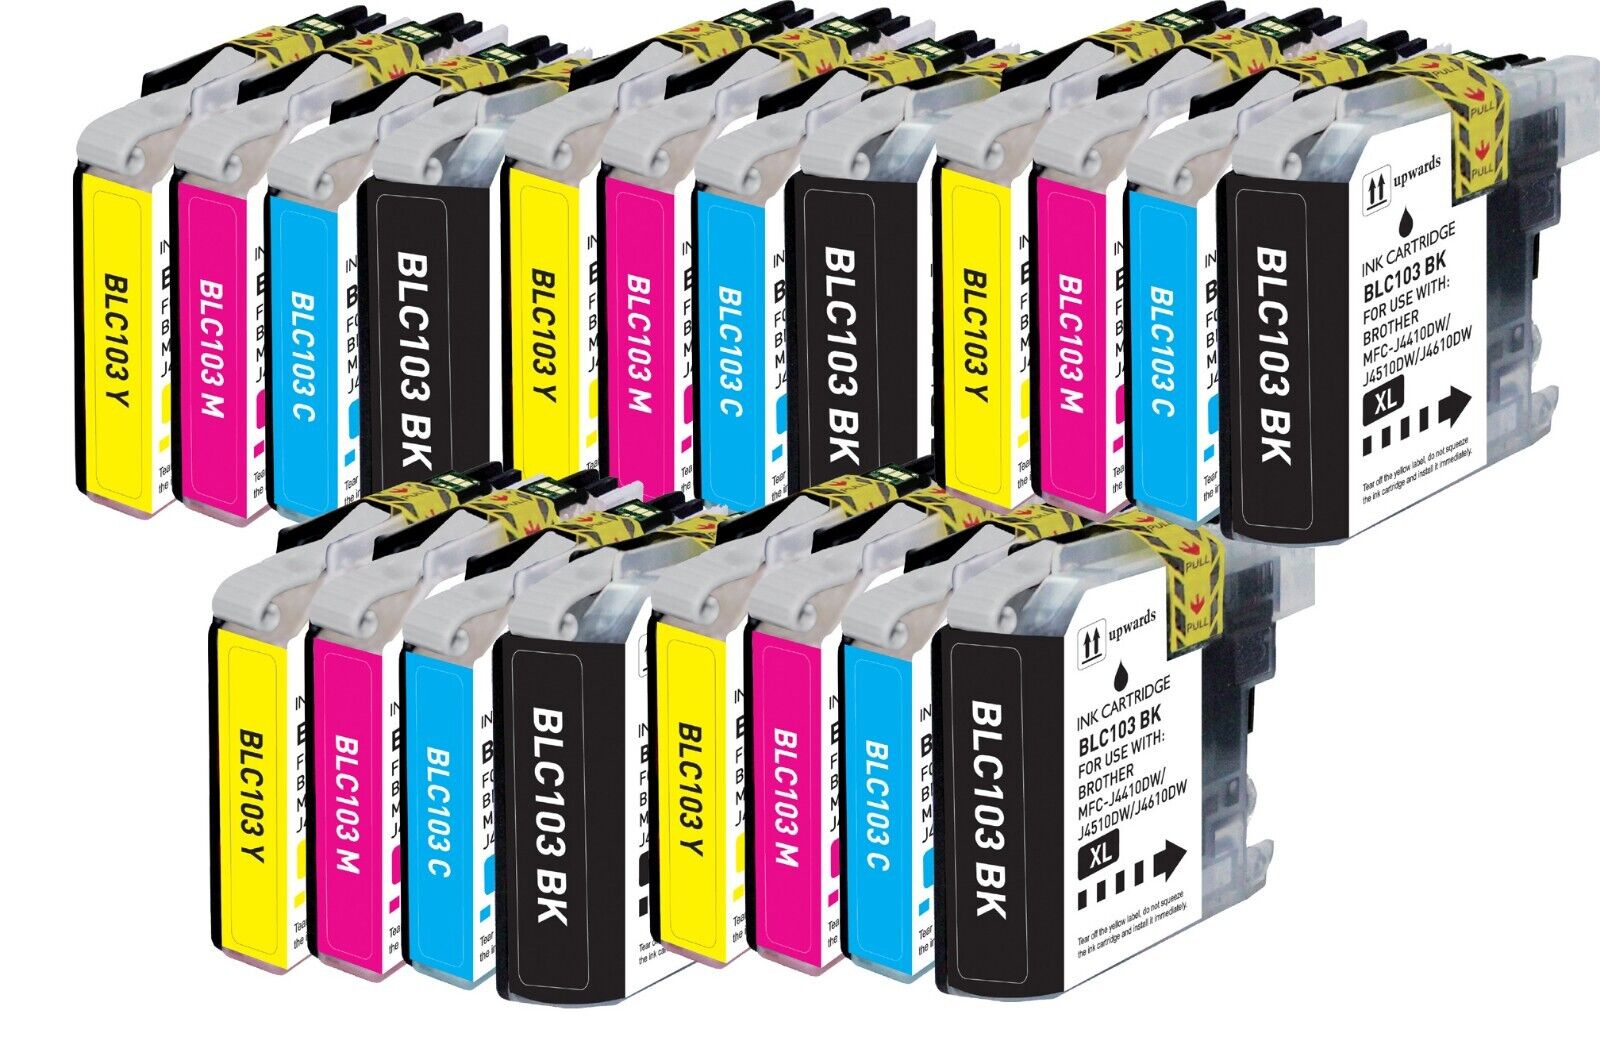 20PK XL Replacement Ink Set fits Brother LC103 MFC-J450DW MFC-J470DW MFC-J475DW